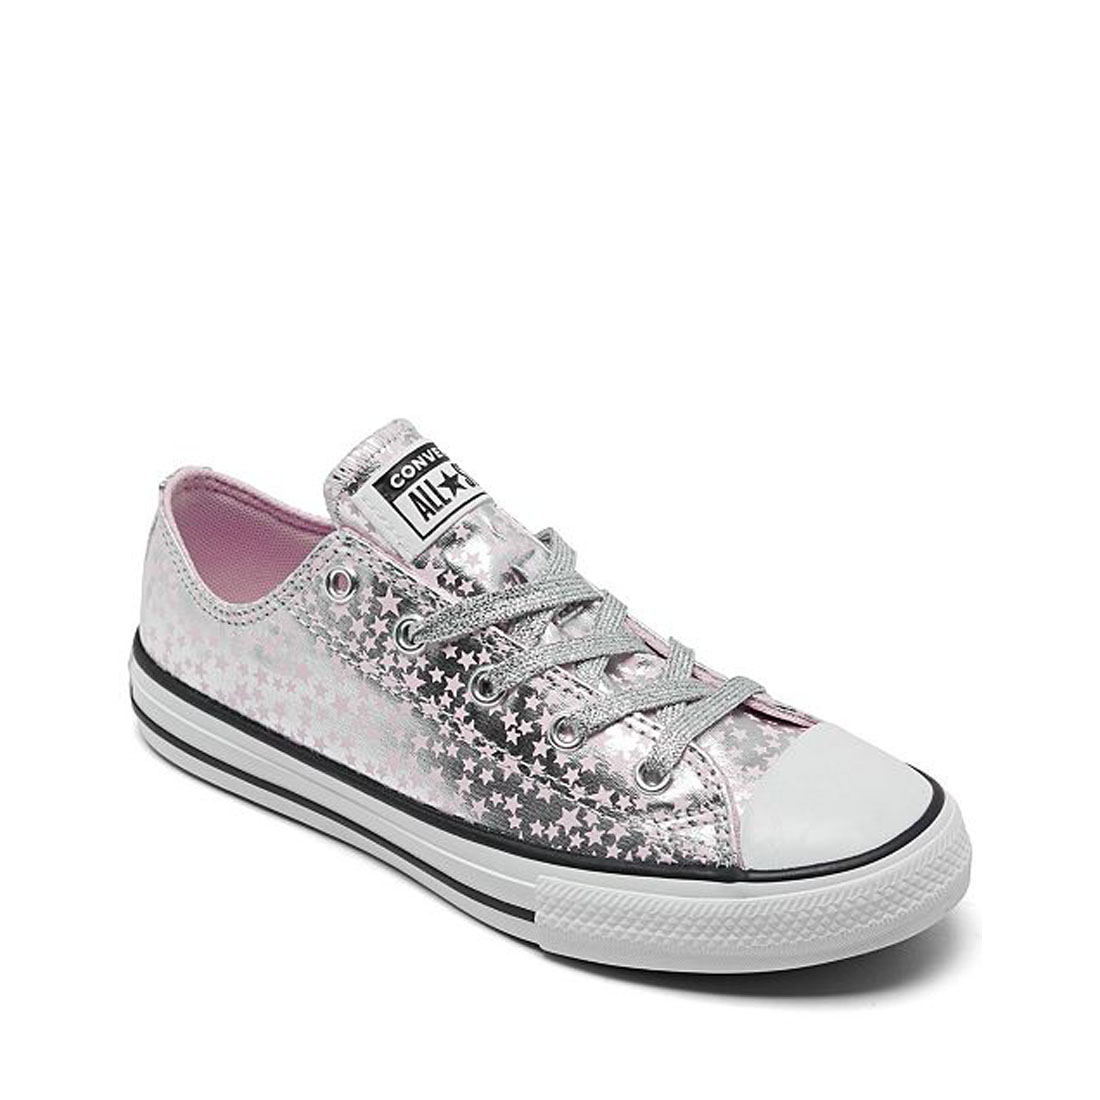 Converse Girls' Chuck Taylor All Star Low Top Girls/Child Shoe Size Little Kid 13.5  Casual 669705F Pink Glaze/Silver - image 1 of 1